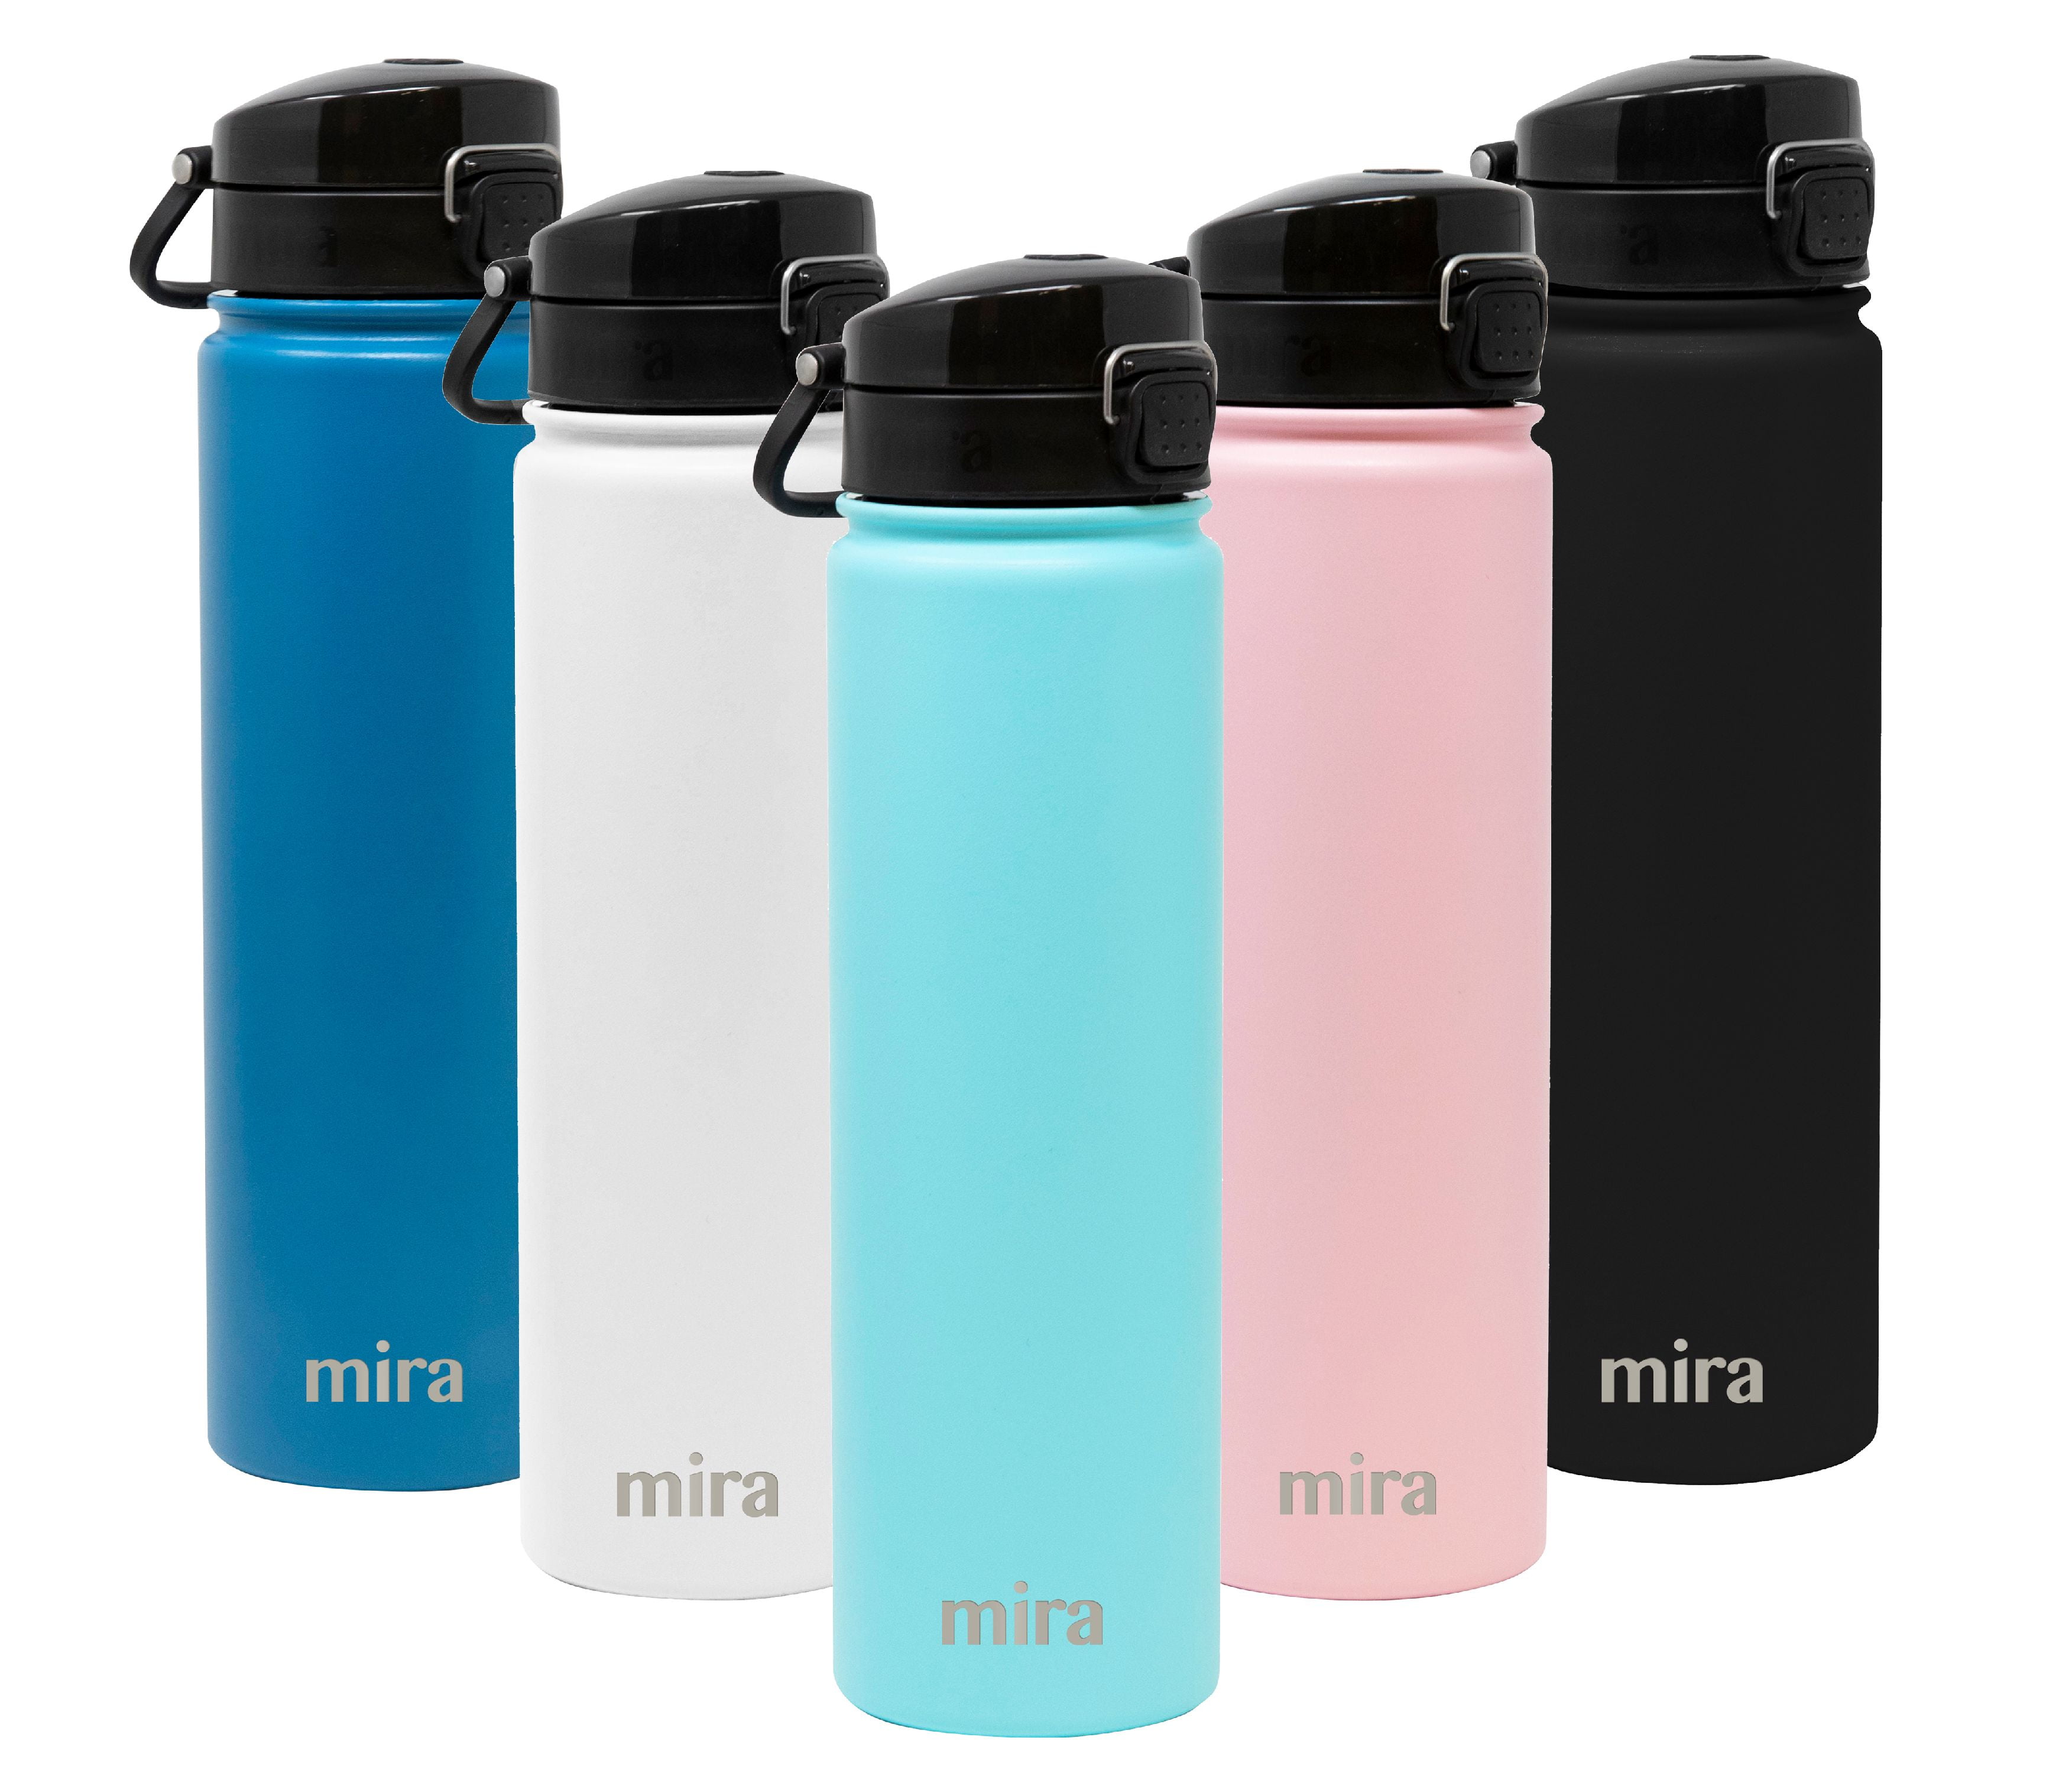 Best Water Bottles for the Beach - The Snorkel Store